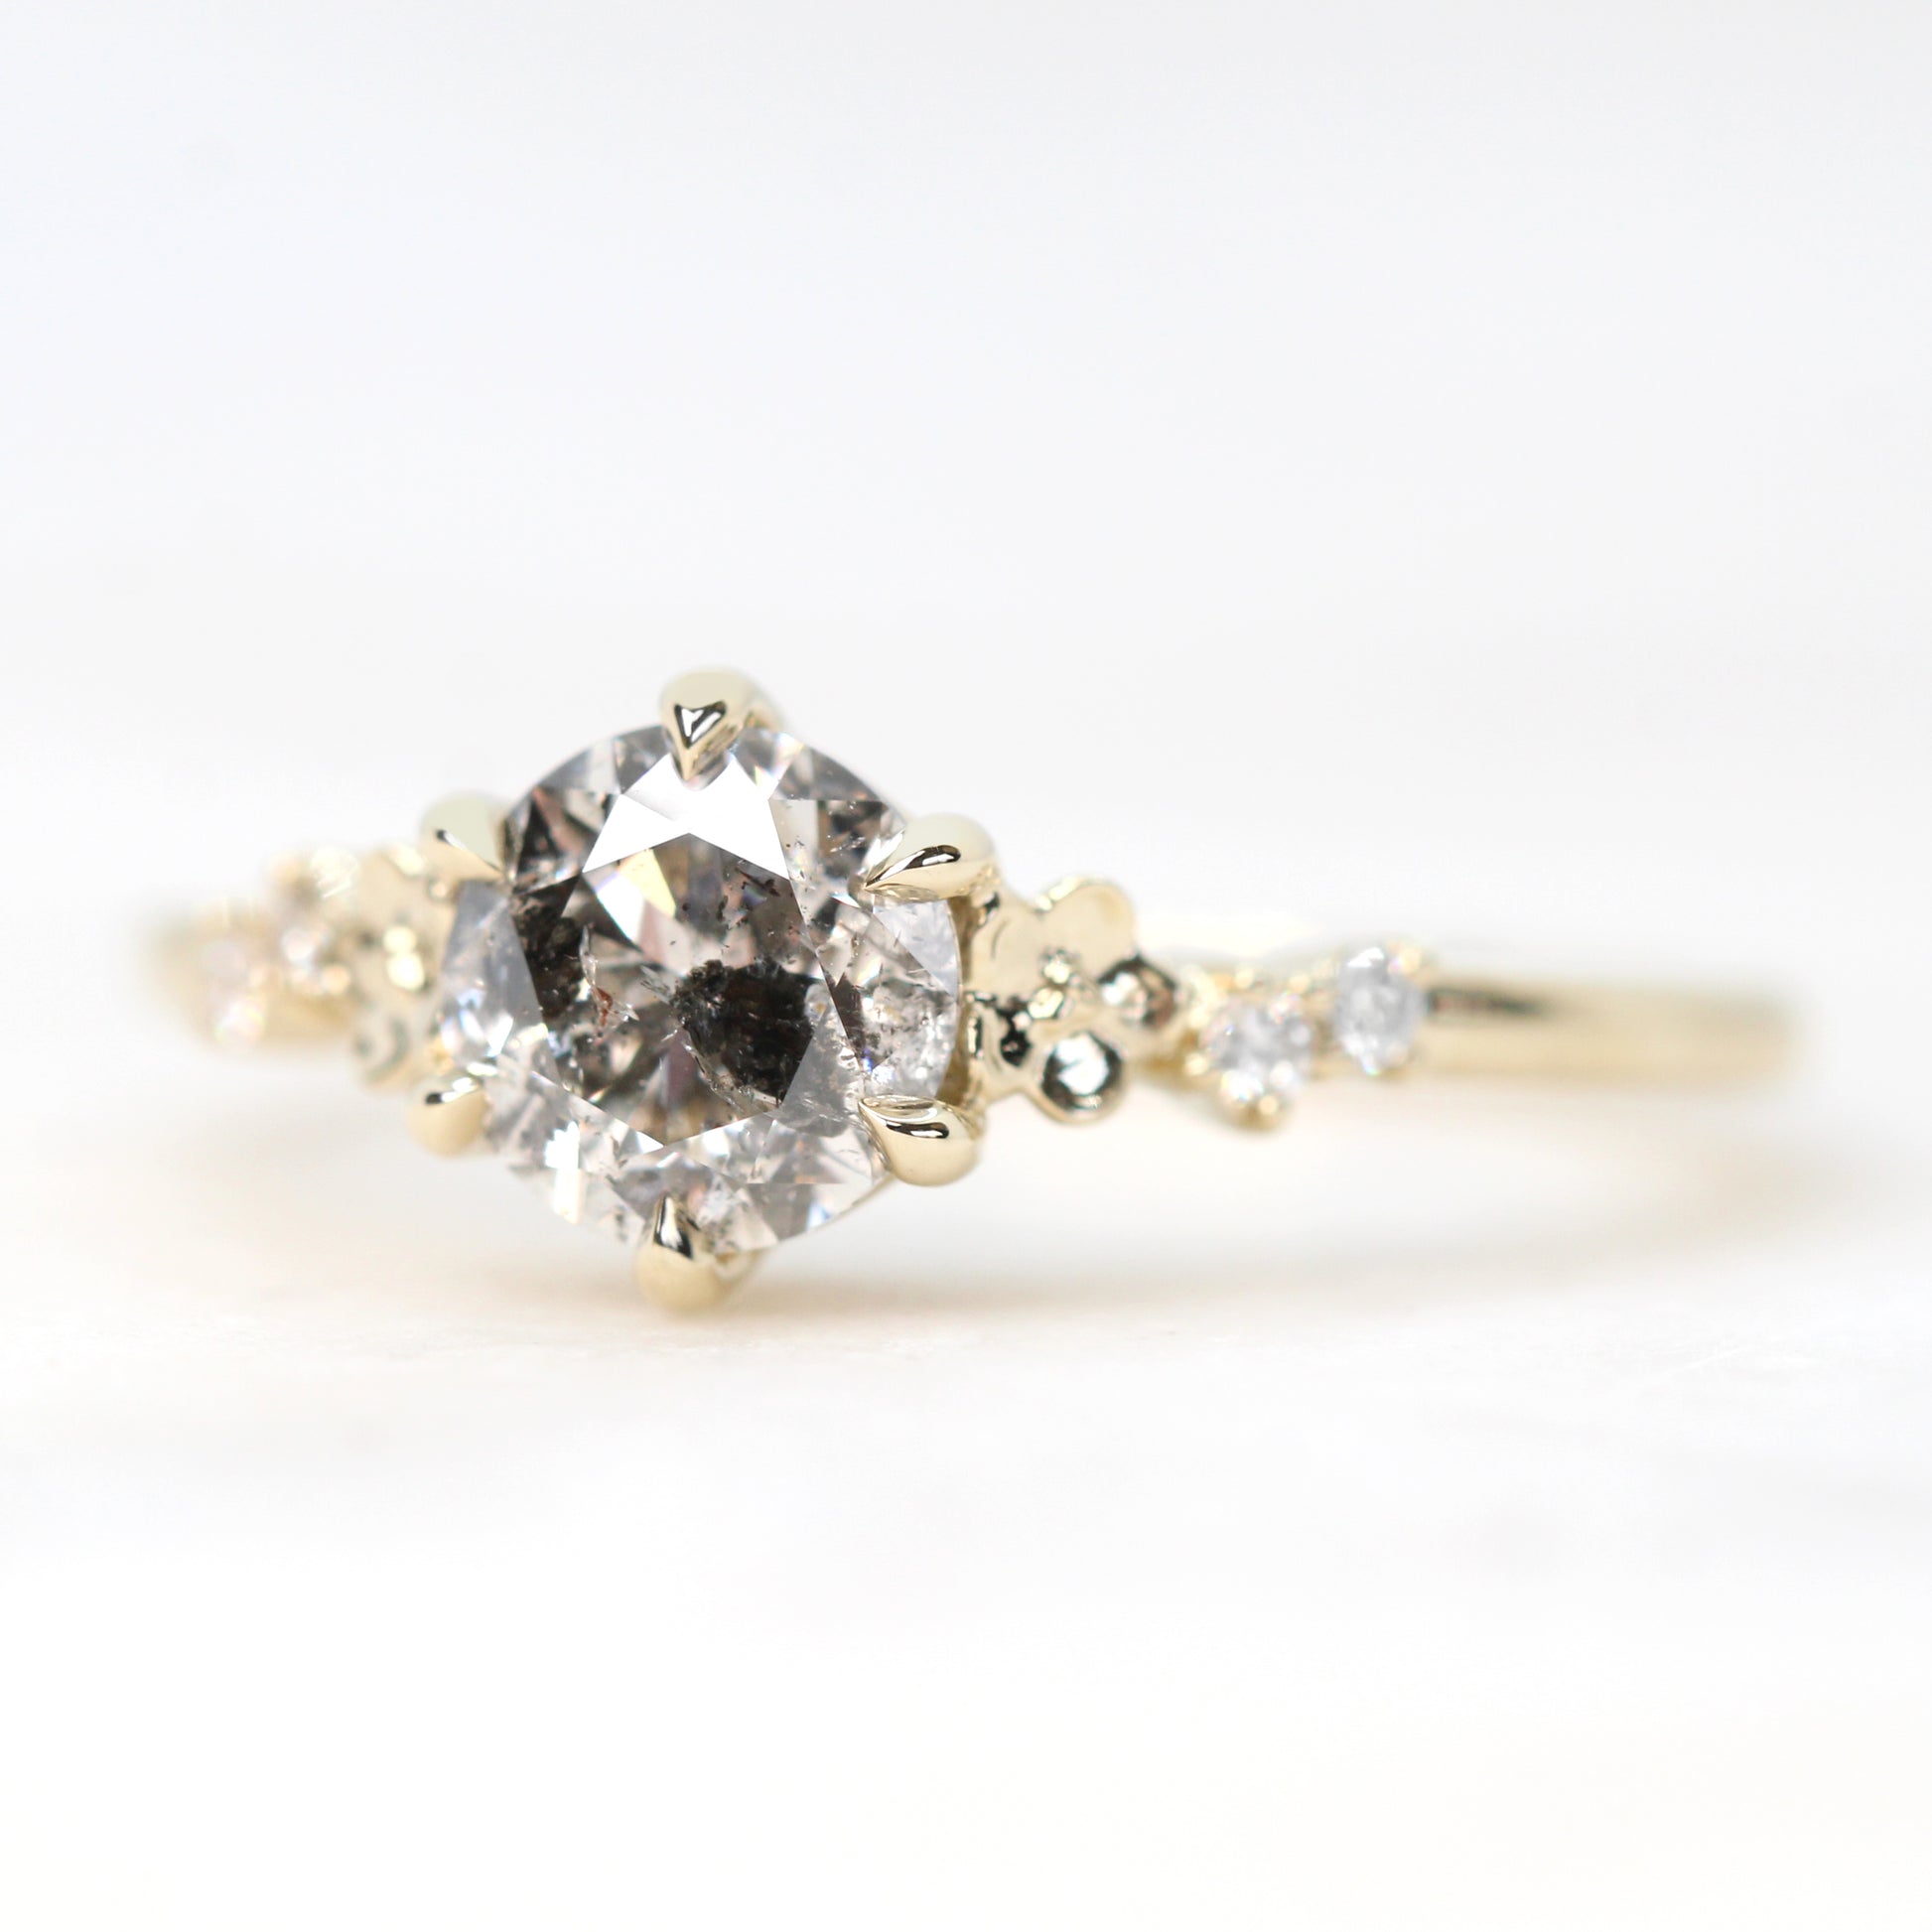 Meadow Ring with a 1.00 Carat Round Dark Gray Salt and Pepper Diamond and White Accent Diamonds in 14k Yellow Gold - Ready to Size and Ship - Midwinter Co. Alternative Bridal Rings and Modern Fine Jewelry